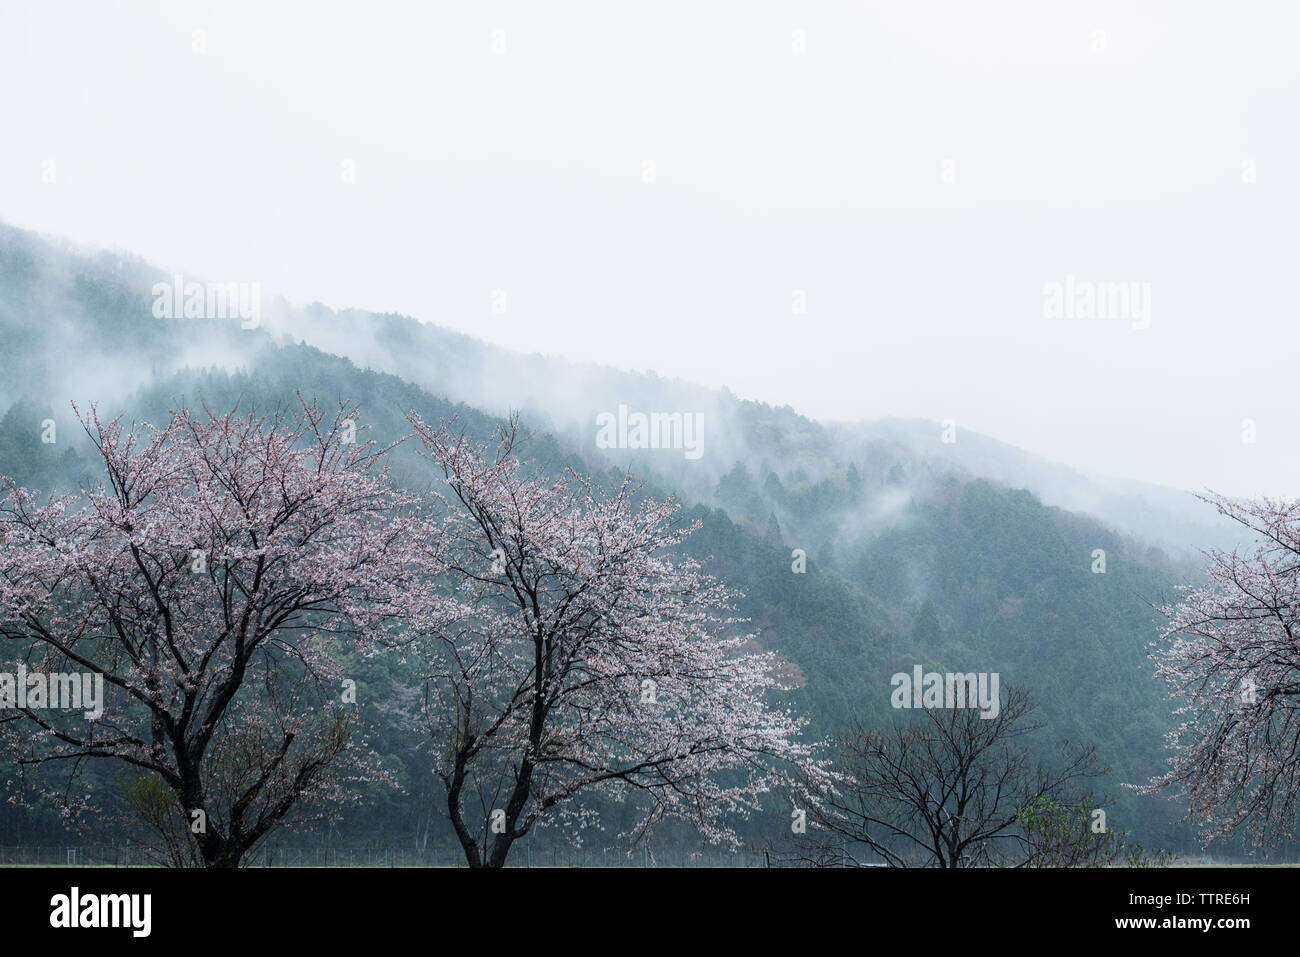 Scenic view of mountains and cherry blossoms during foggy weather Stock Photo